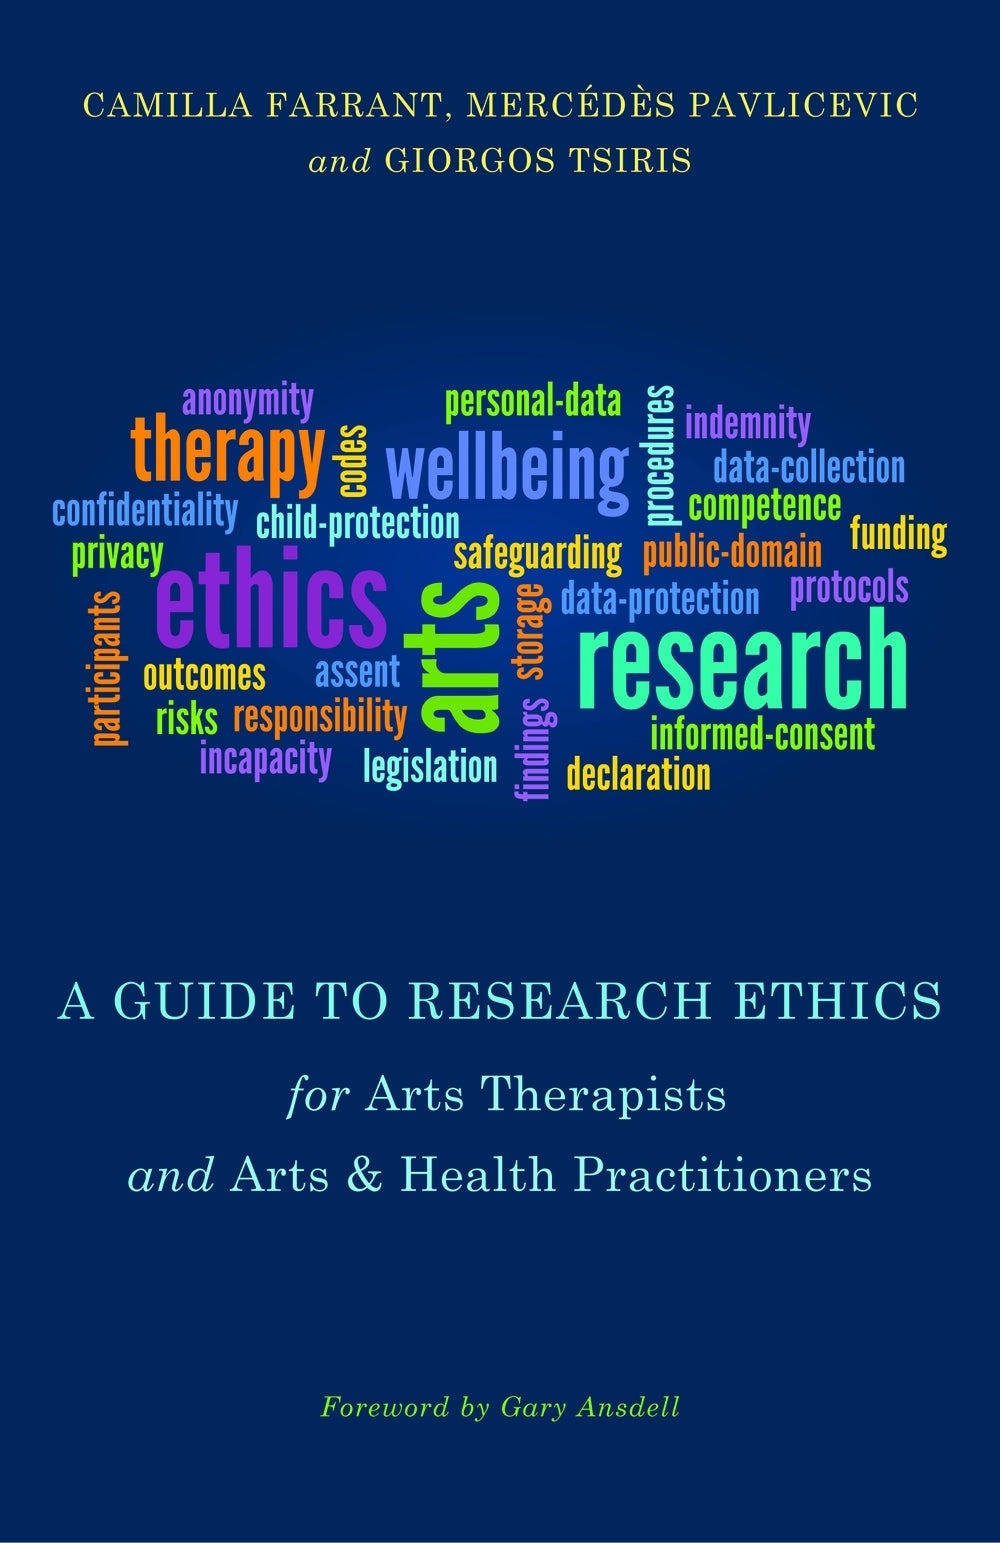 A Guide to Research Ethics for Arts Therapists and Arts & Health Practitioners by Gary Ansdell, Mercedes Pavlicevic, Giorgos Tsiris, Camilla Farrant